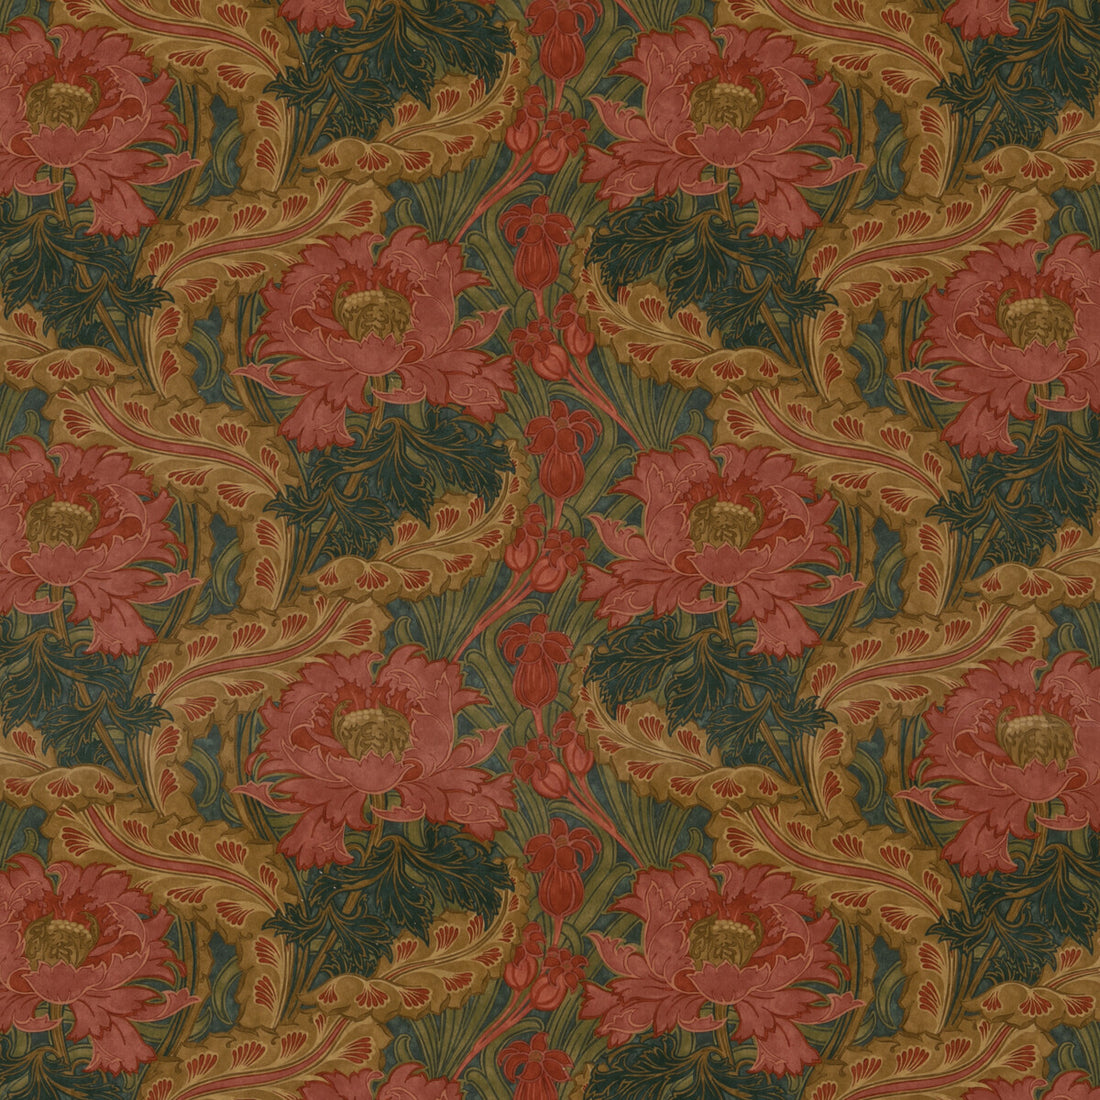 Brantwood Velvet fabric in rose/green color - pattern BP10970.1.0 - by G P &amp; J Baker in the Original Brantwood Fabric collection